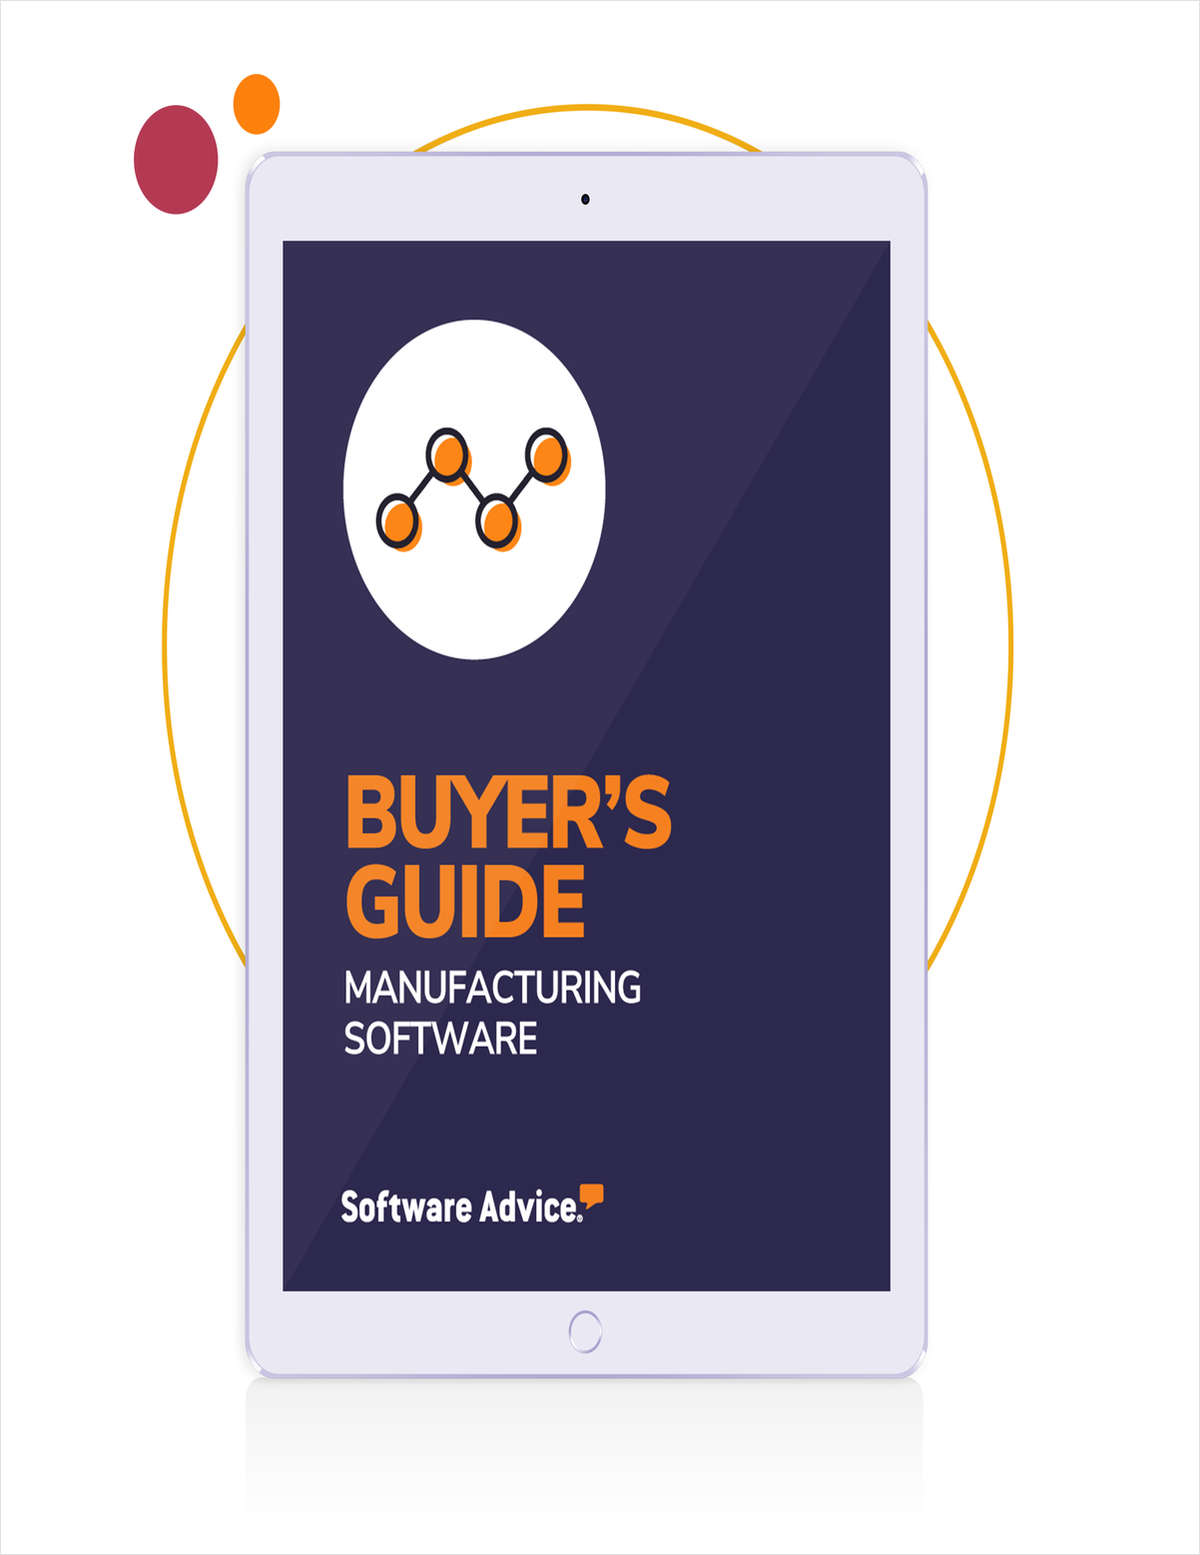 Find Your Perfect Manufacturing Software Match in 2021 With This Guide